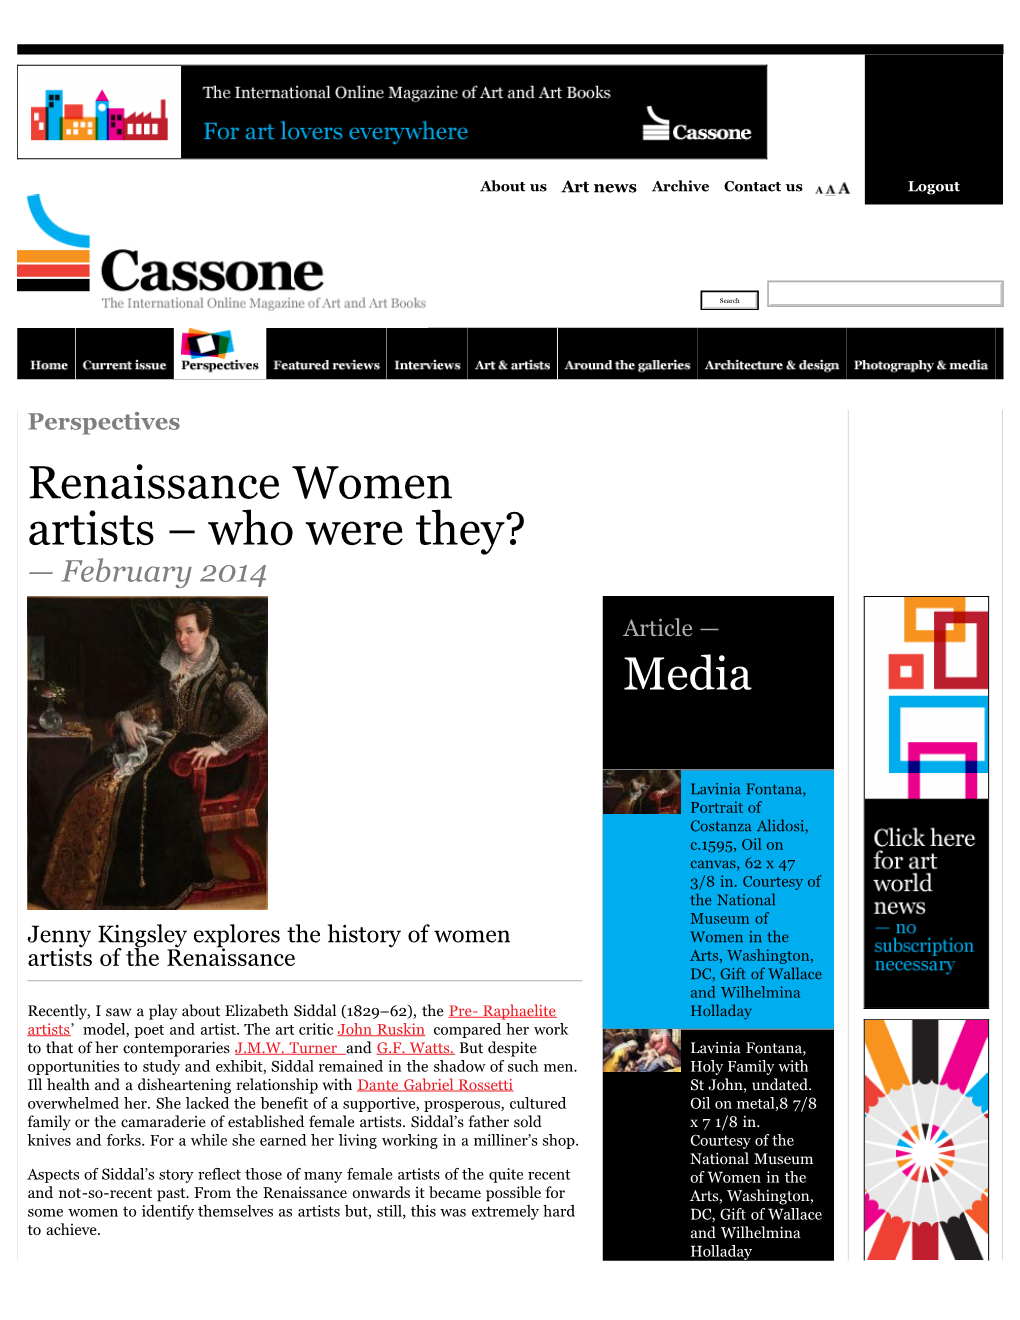 Renaissance Women Artists – Who Were They? :: February 2014